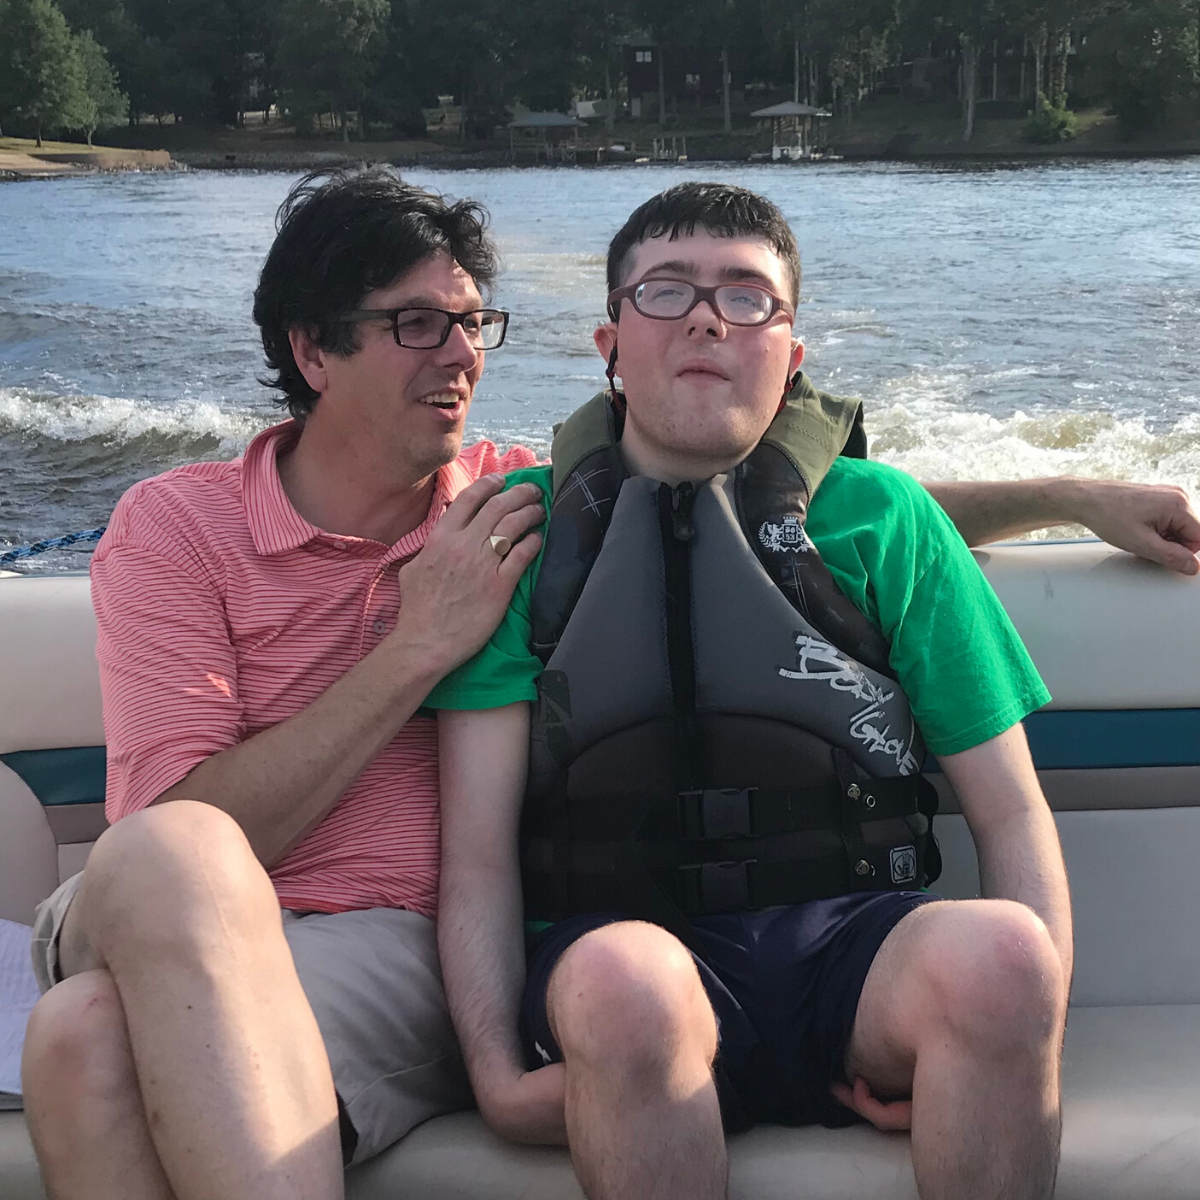 Jack riding in a boat.